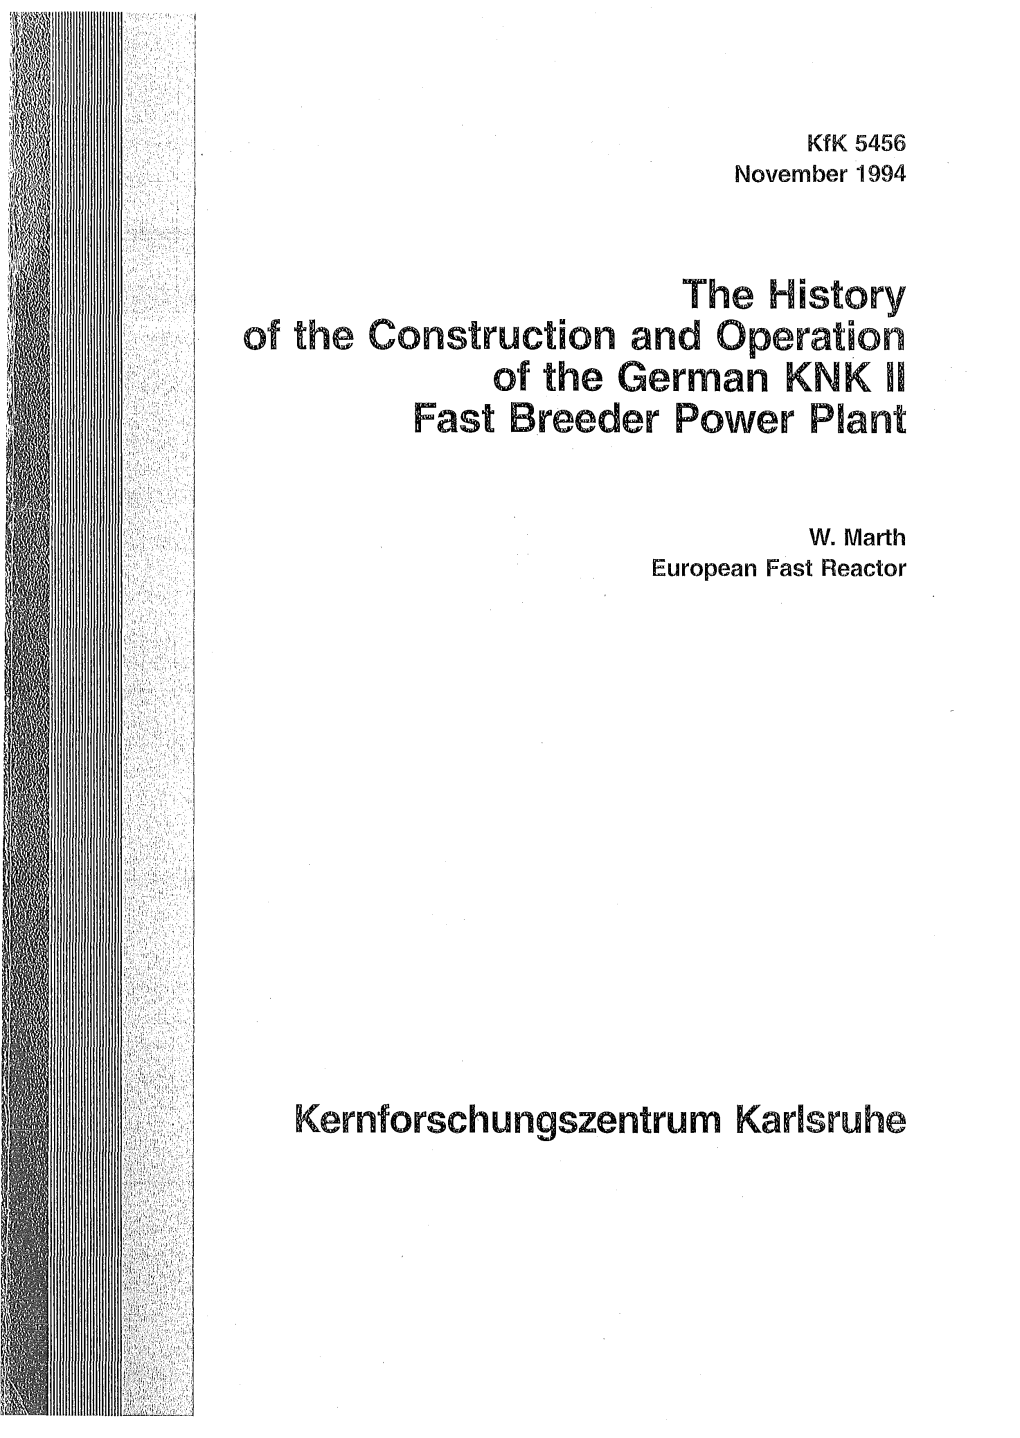 The History of the Construction and Operation of the German KNK N Fast Breeder Power Plant